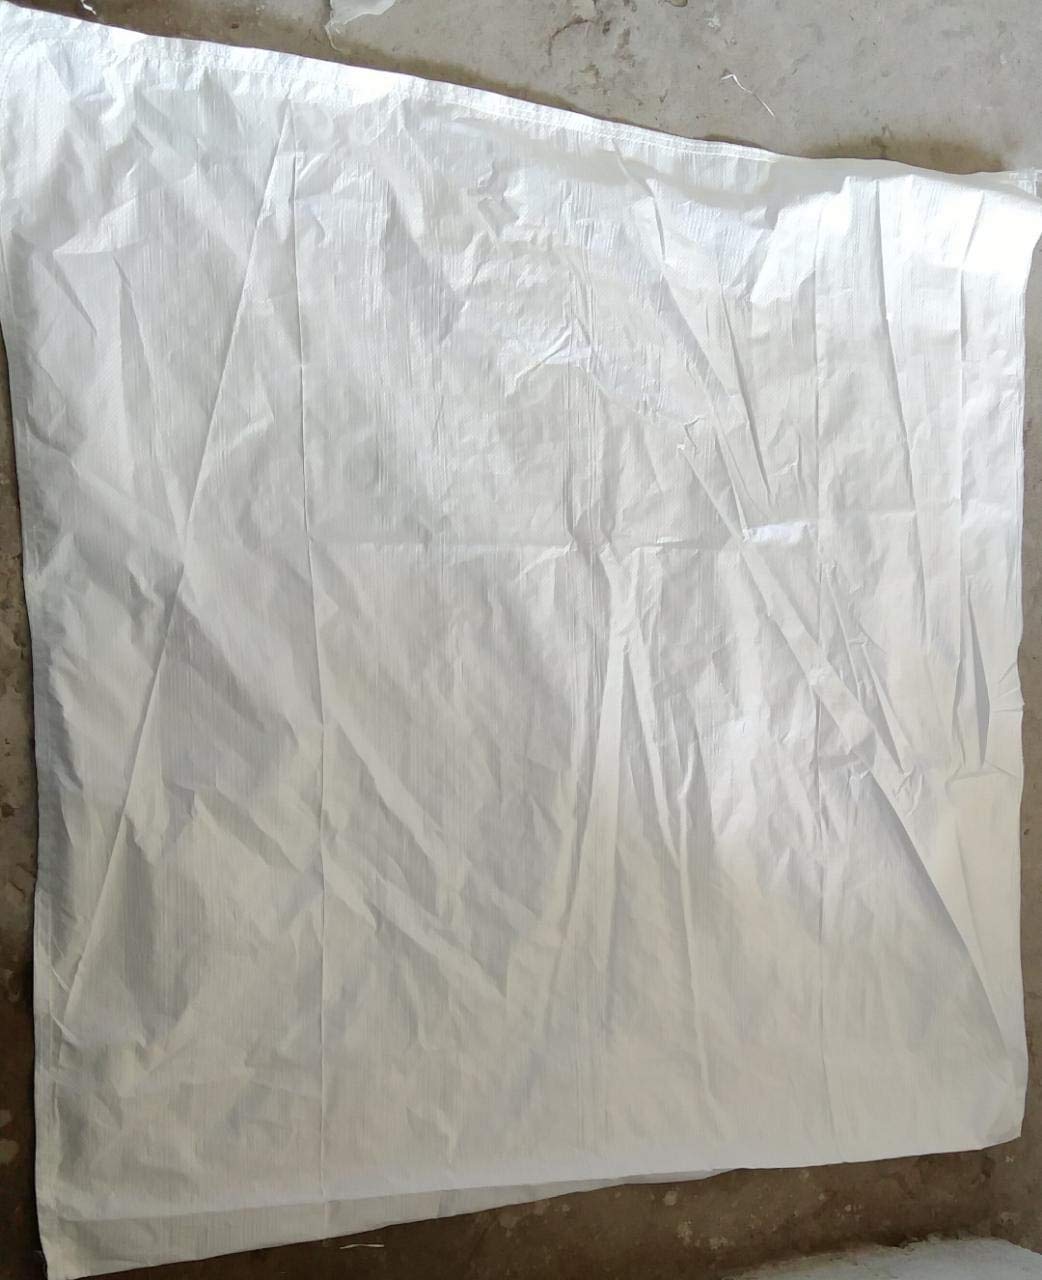 Empty White Big Bora, Large HDPE Bori for Packing of Food, bori Bags Packing Parcels Goods Items (Size 60x65 Inch) (Pack of 10) (44x50, Set Of 10)